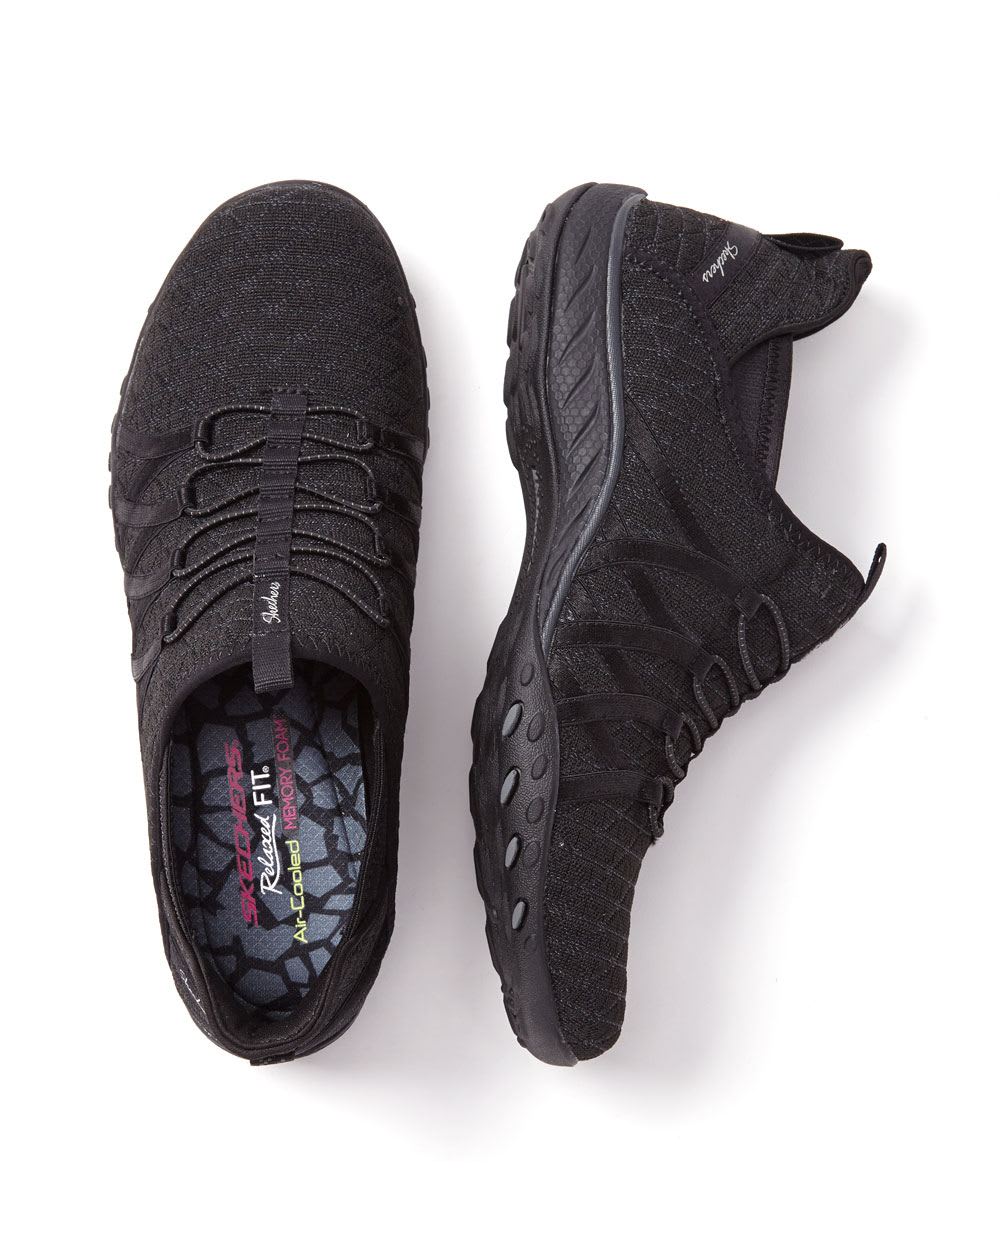 relaxed fit air cooled memory foam skechers